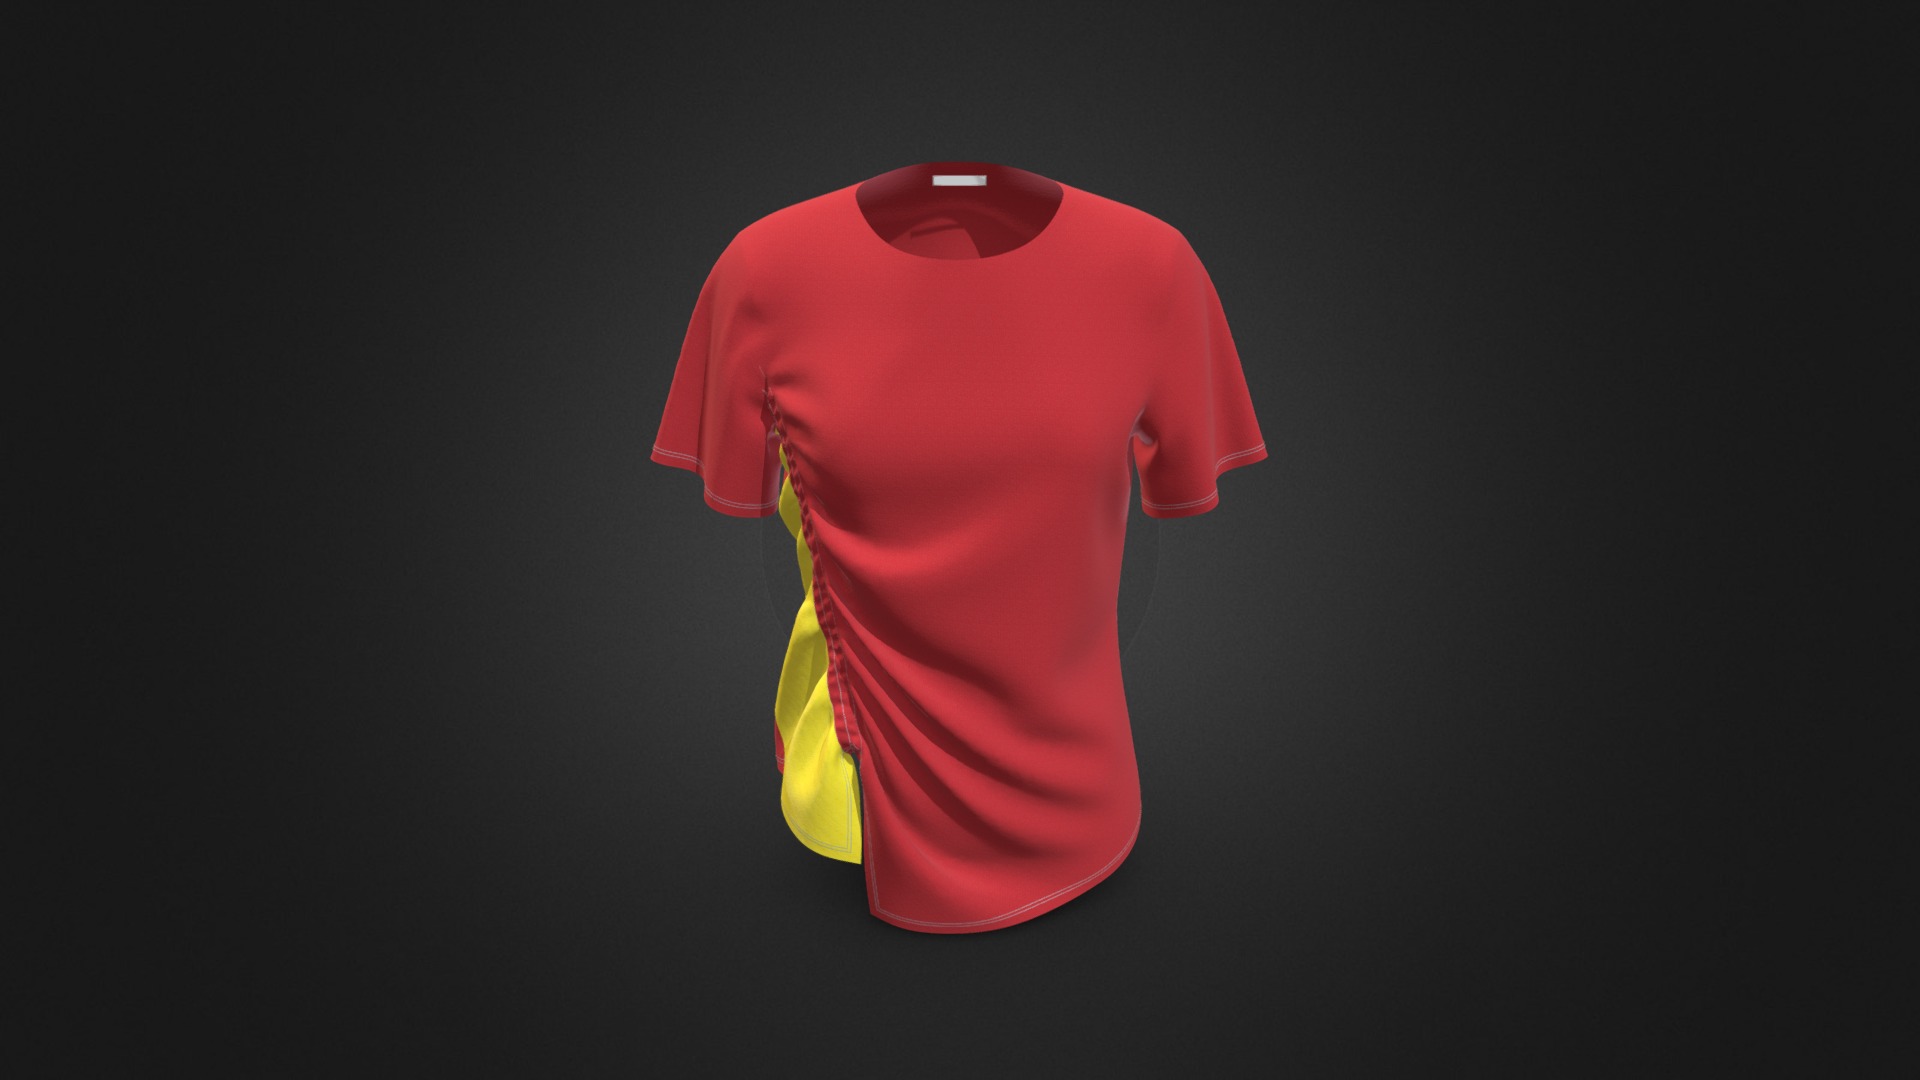 3D model Shirring Point T-shirt - This is a 3D model of the Shirring Point T-shirt. The 3D model is about a red shirt with a yellow stripe.